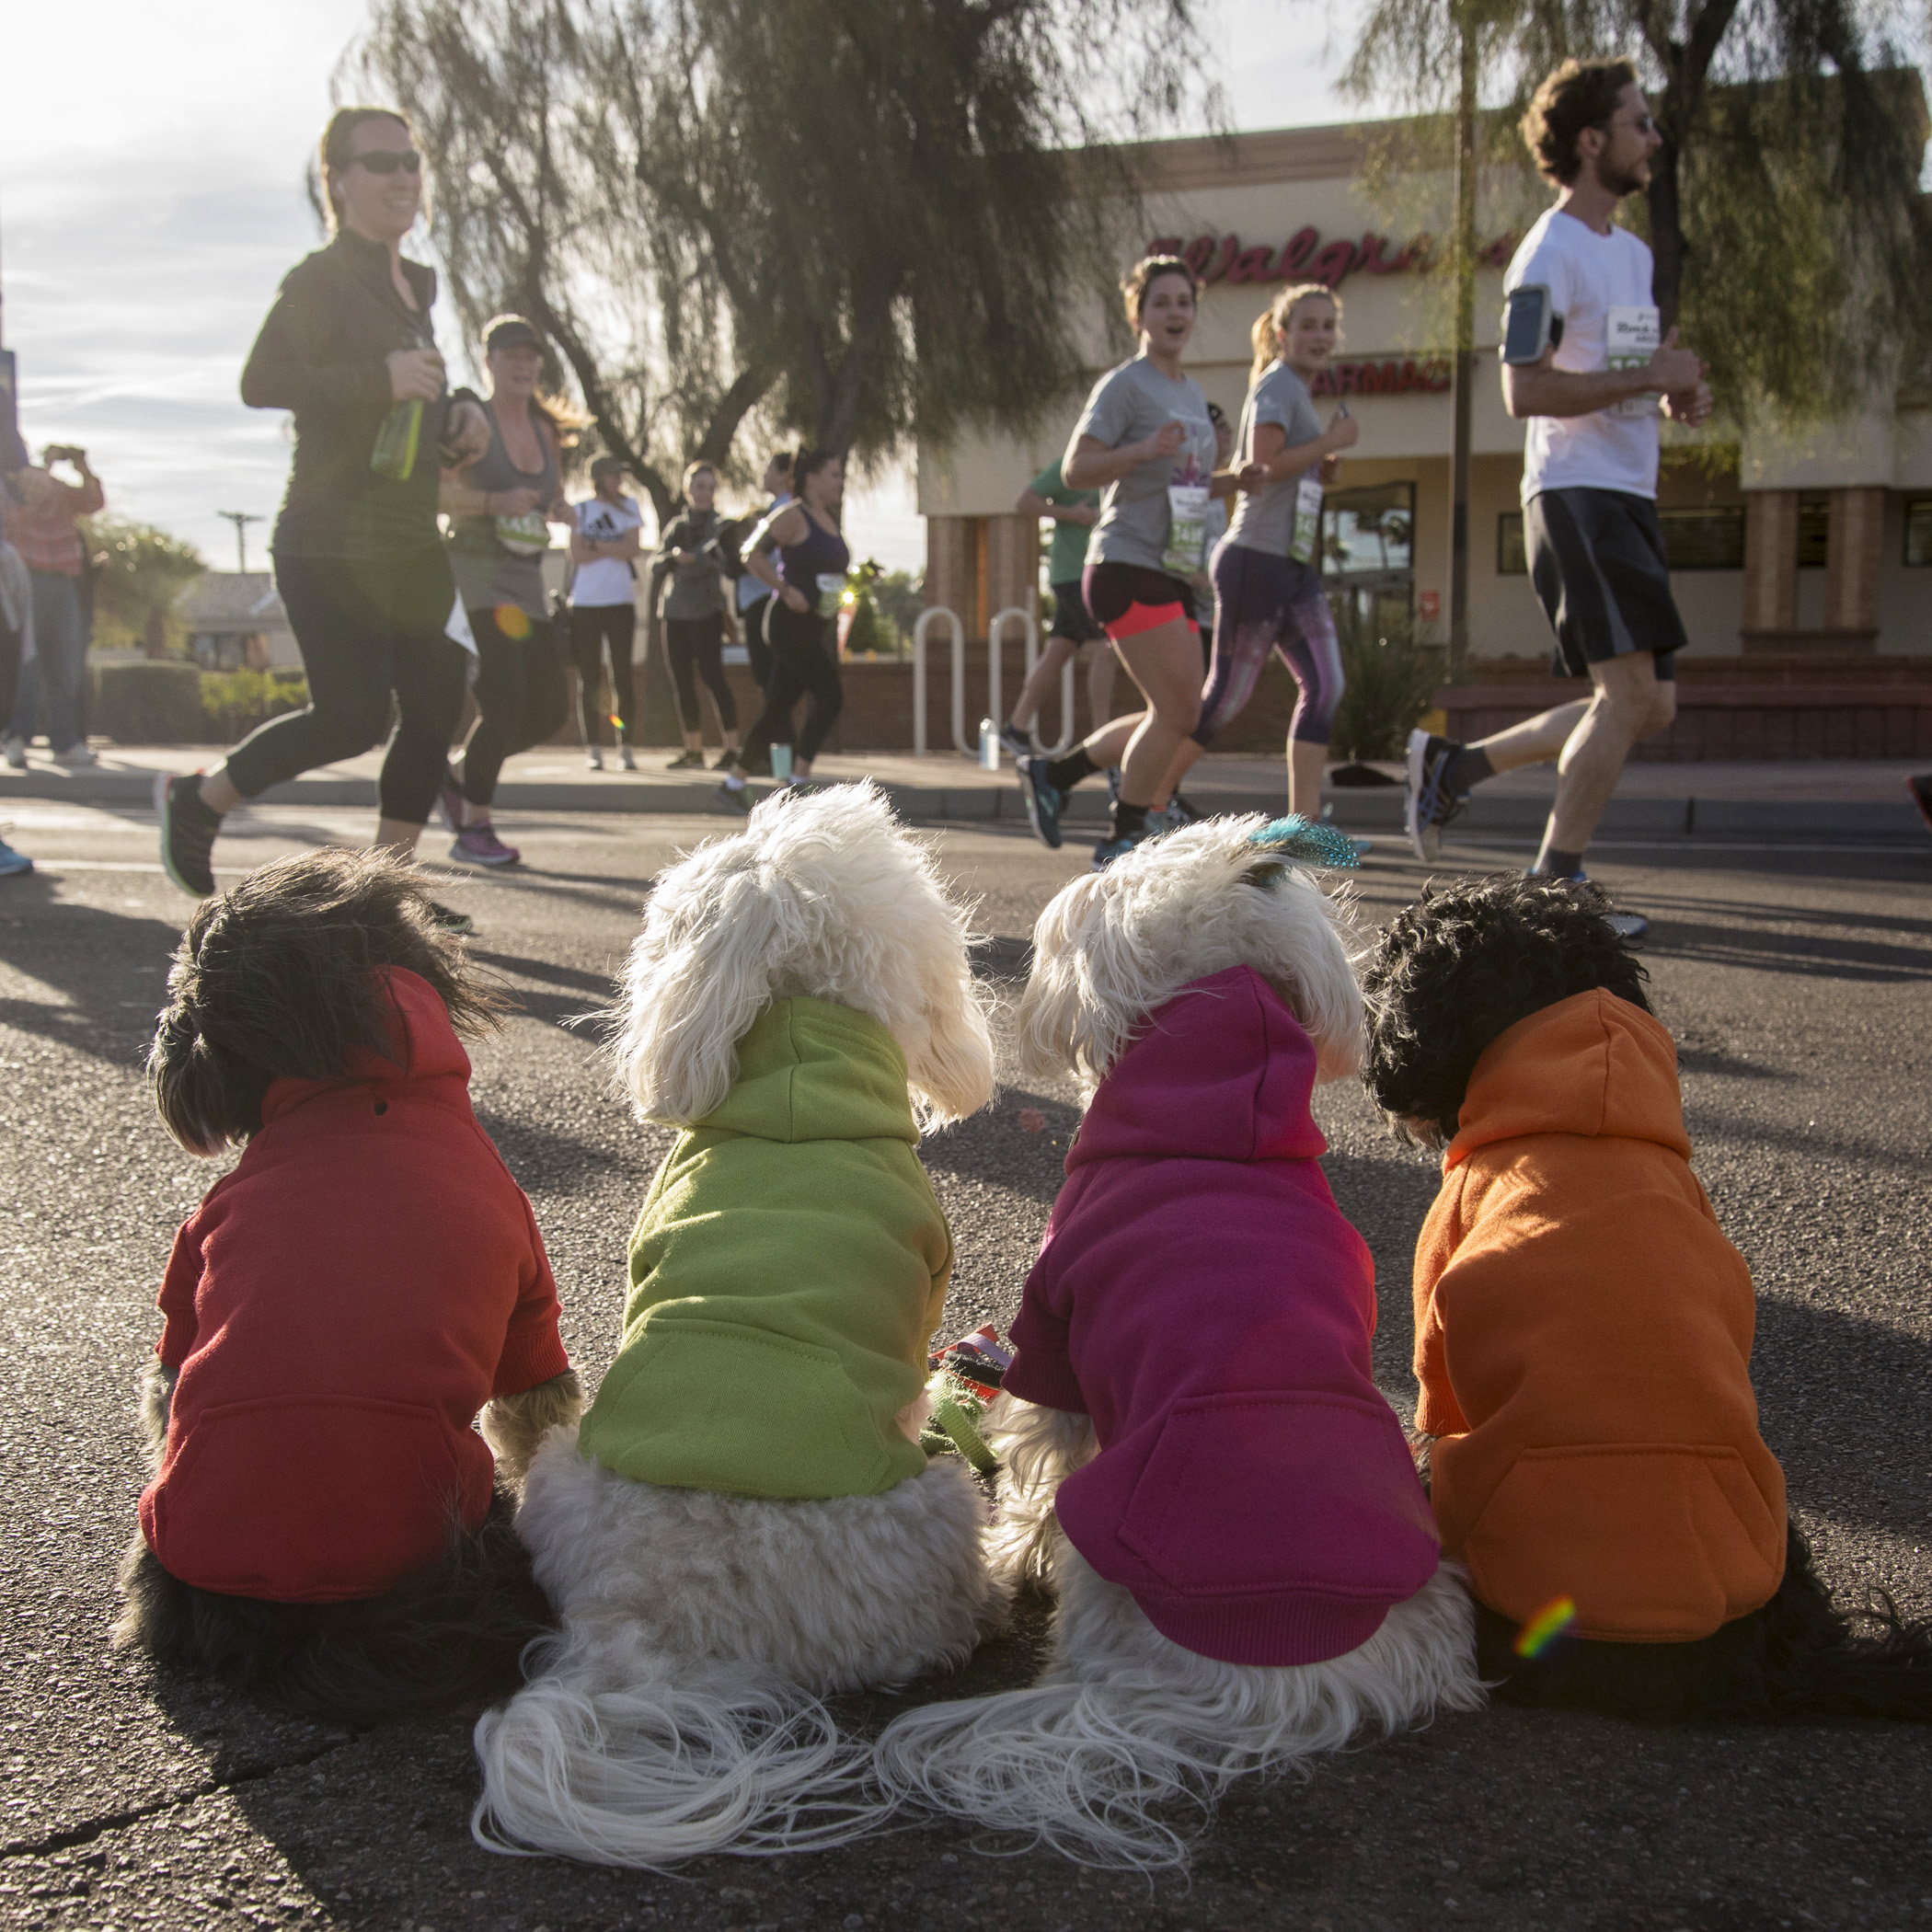  They came into town to run in the Arizona Rock N Roll Half Marathon. Of course, the best cheering squad ever had to get up nice and early to cheer them on! 